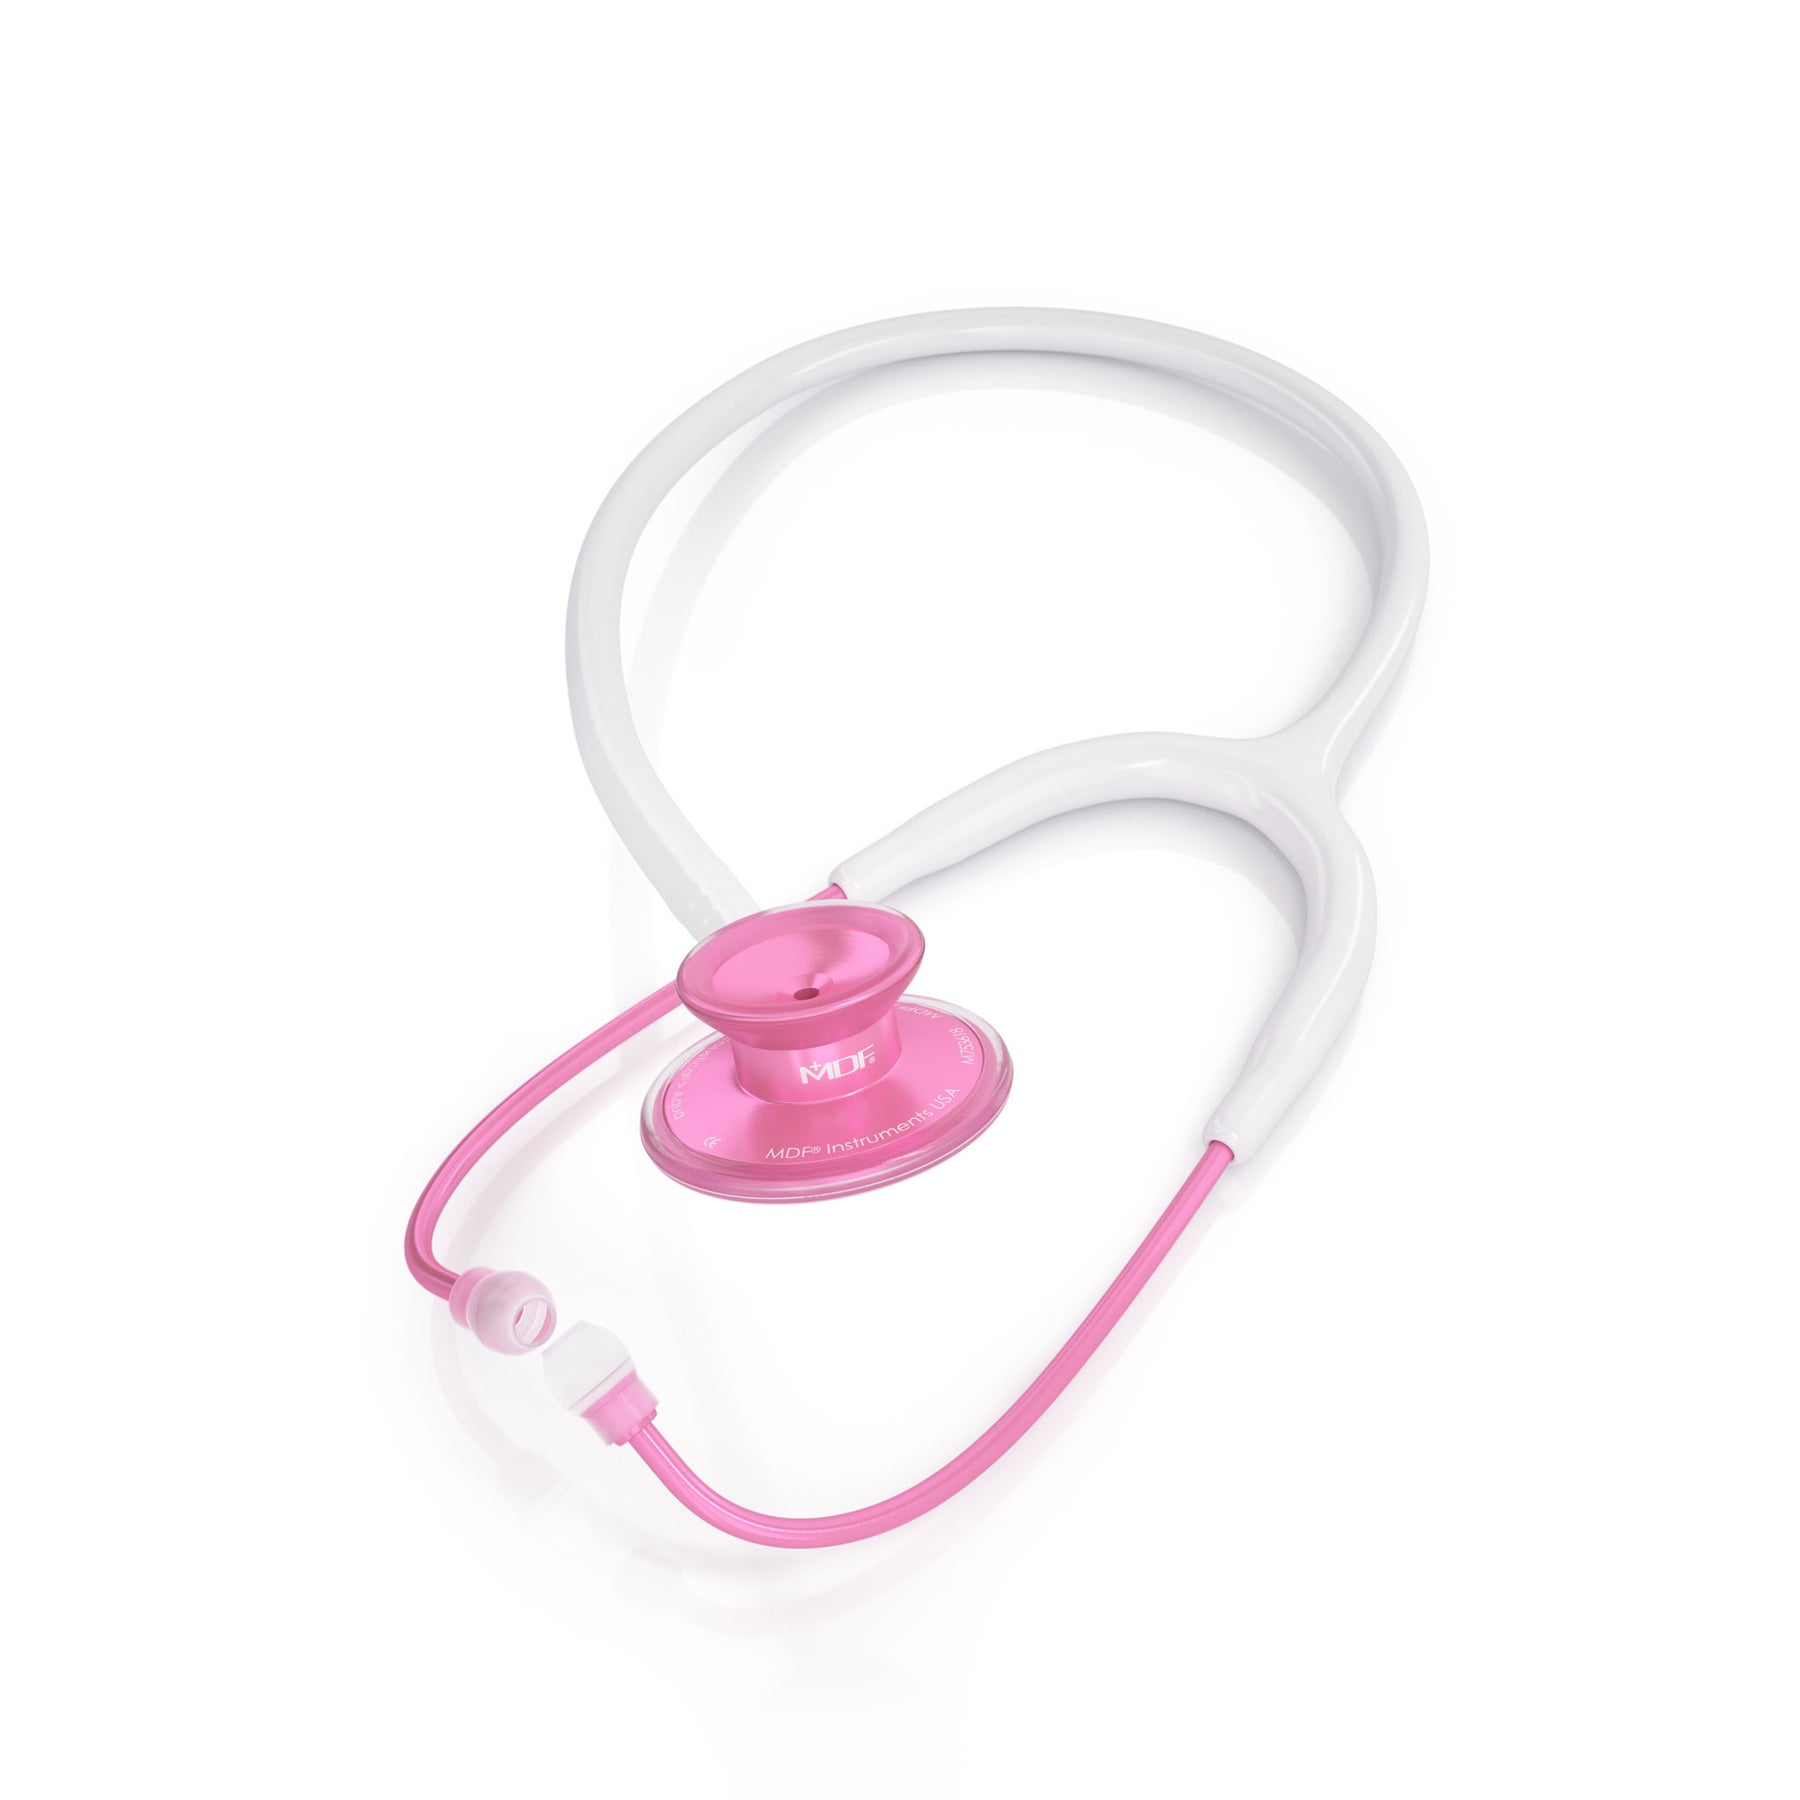 ACOUSTICA® PINK STETHOSCOPE PINKORE AND WHITE